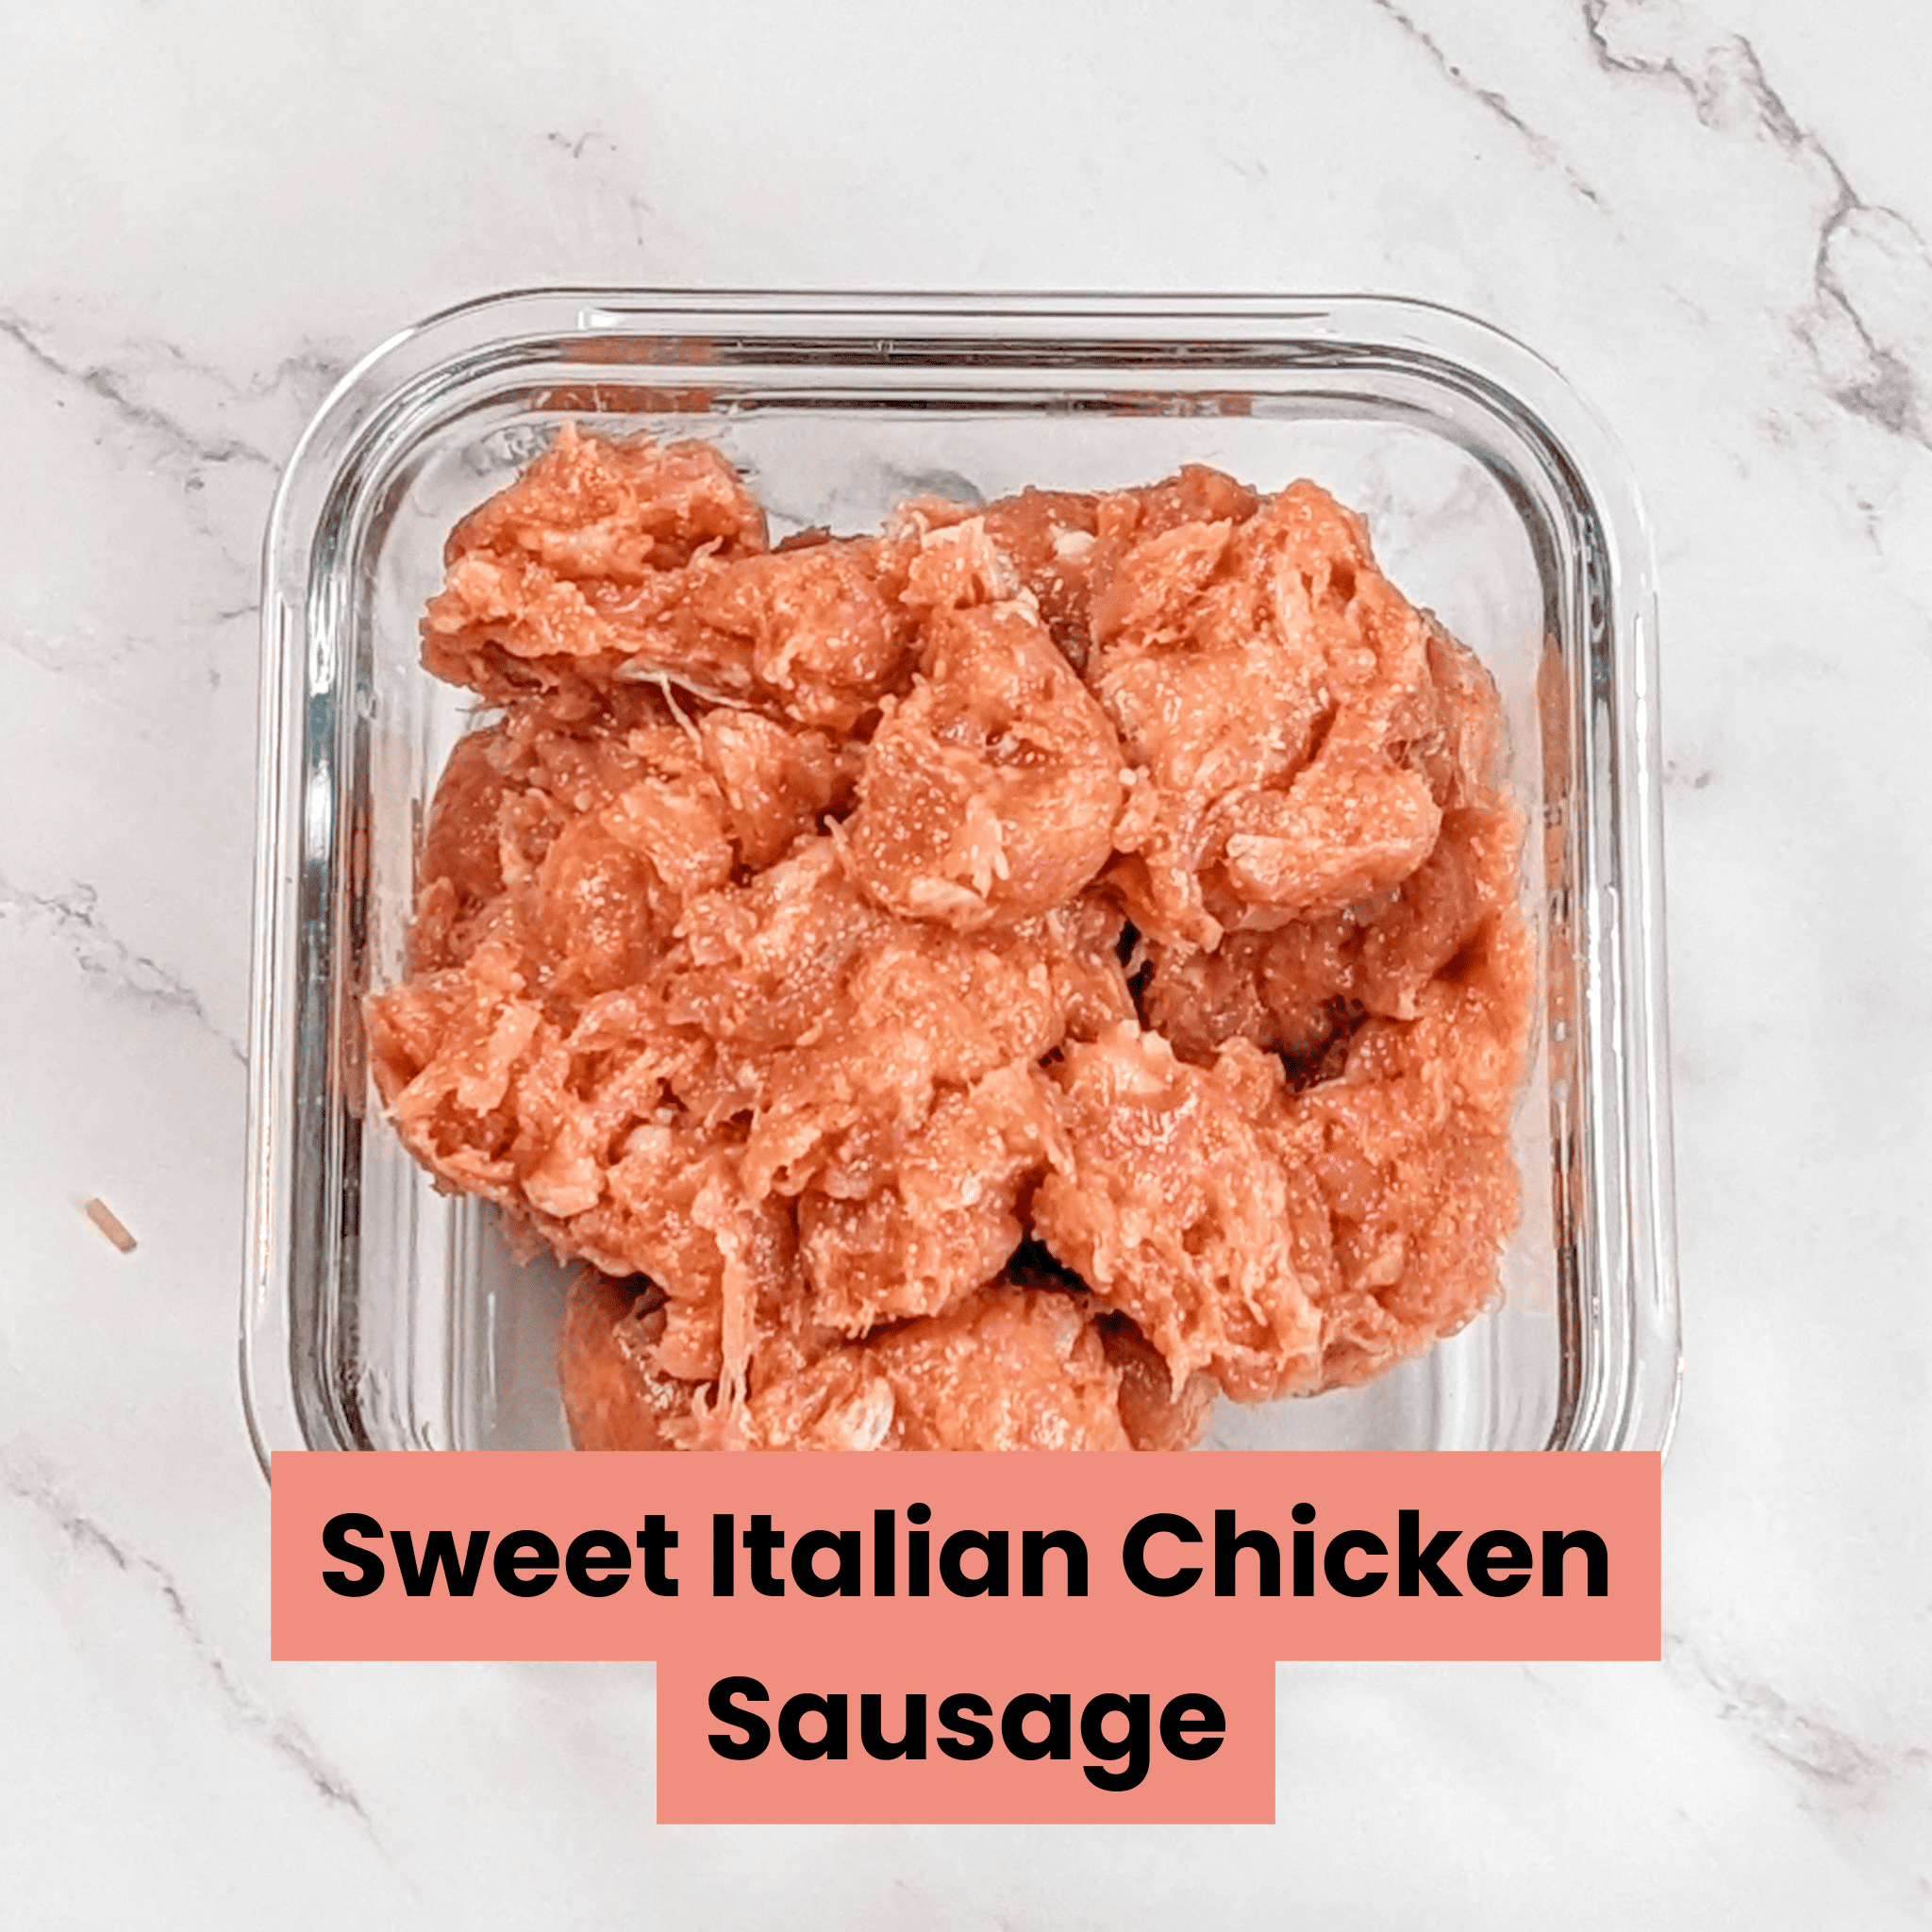 sweet italian chicken sausage in a shallow square glass container